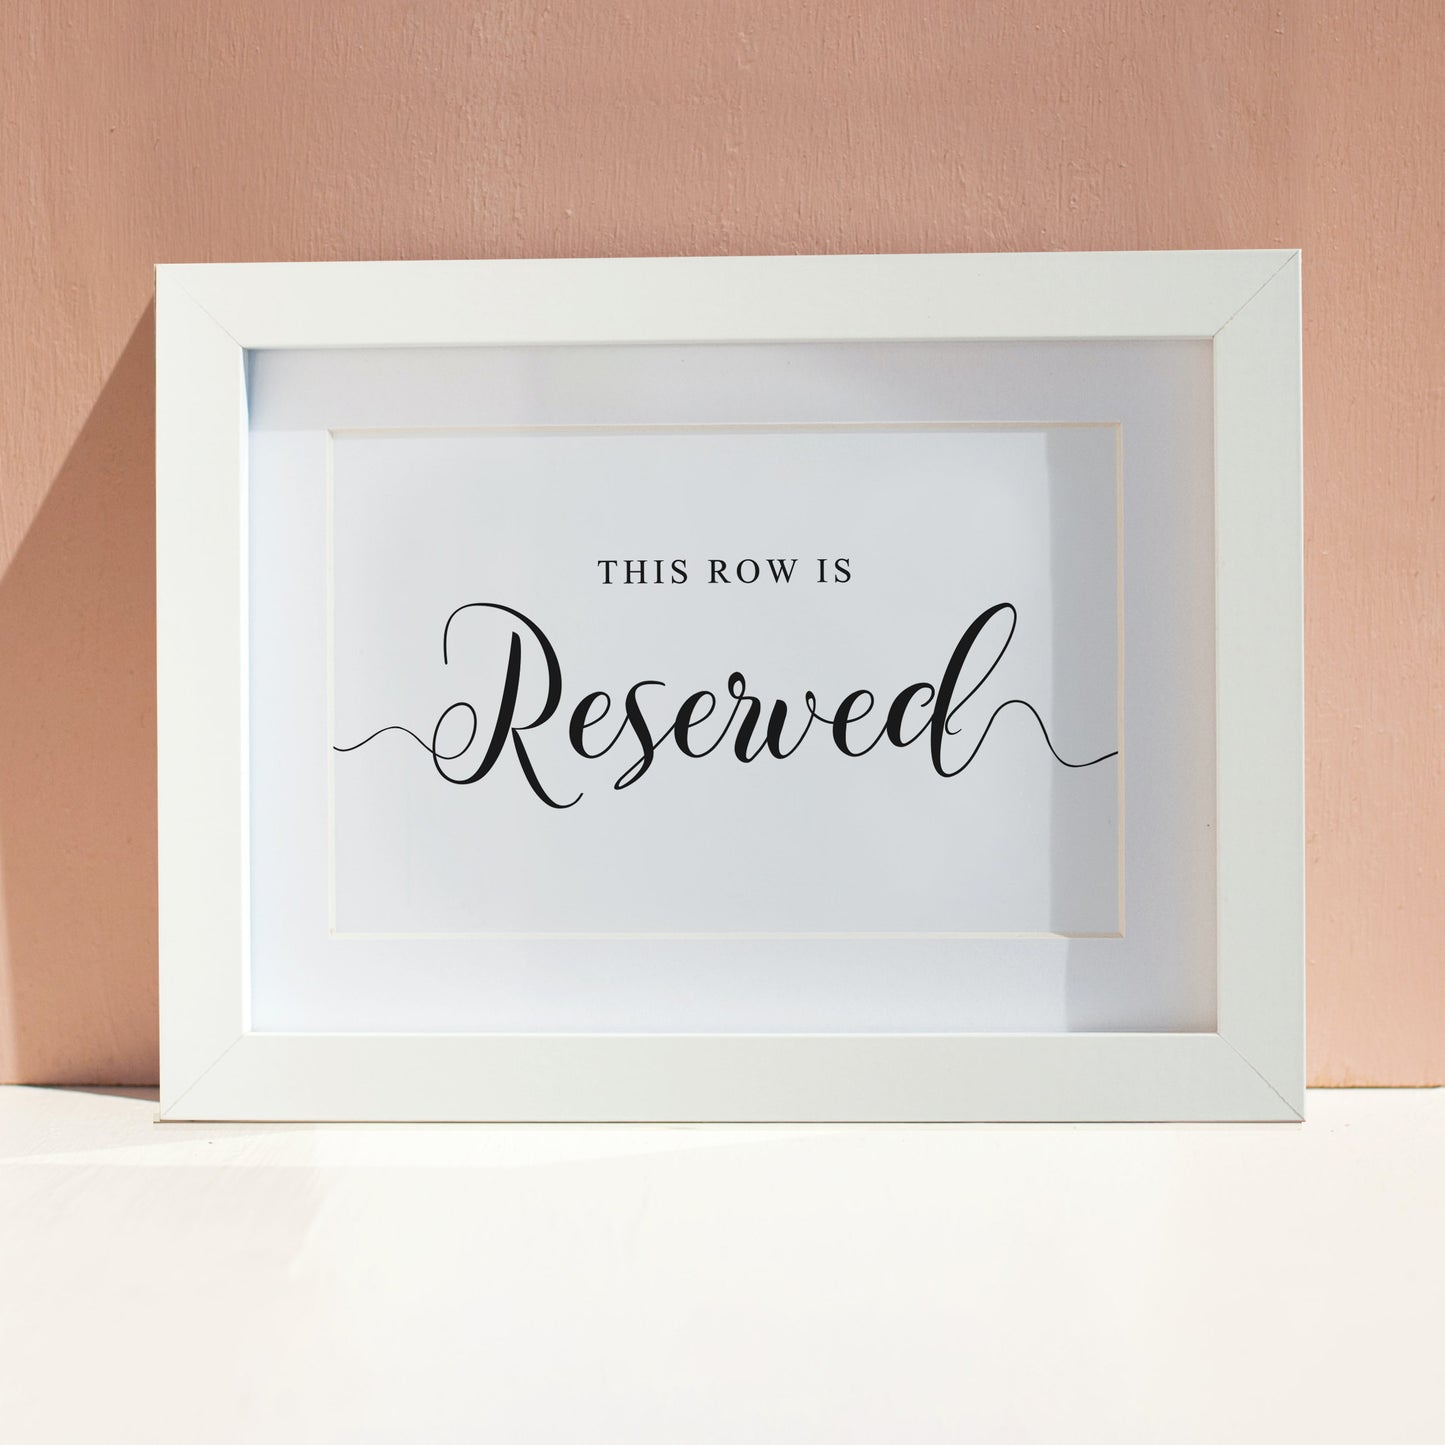 This row is reserved elegant sign to print at home